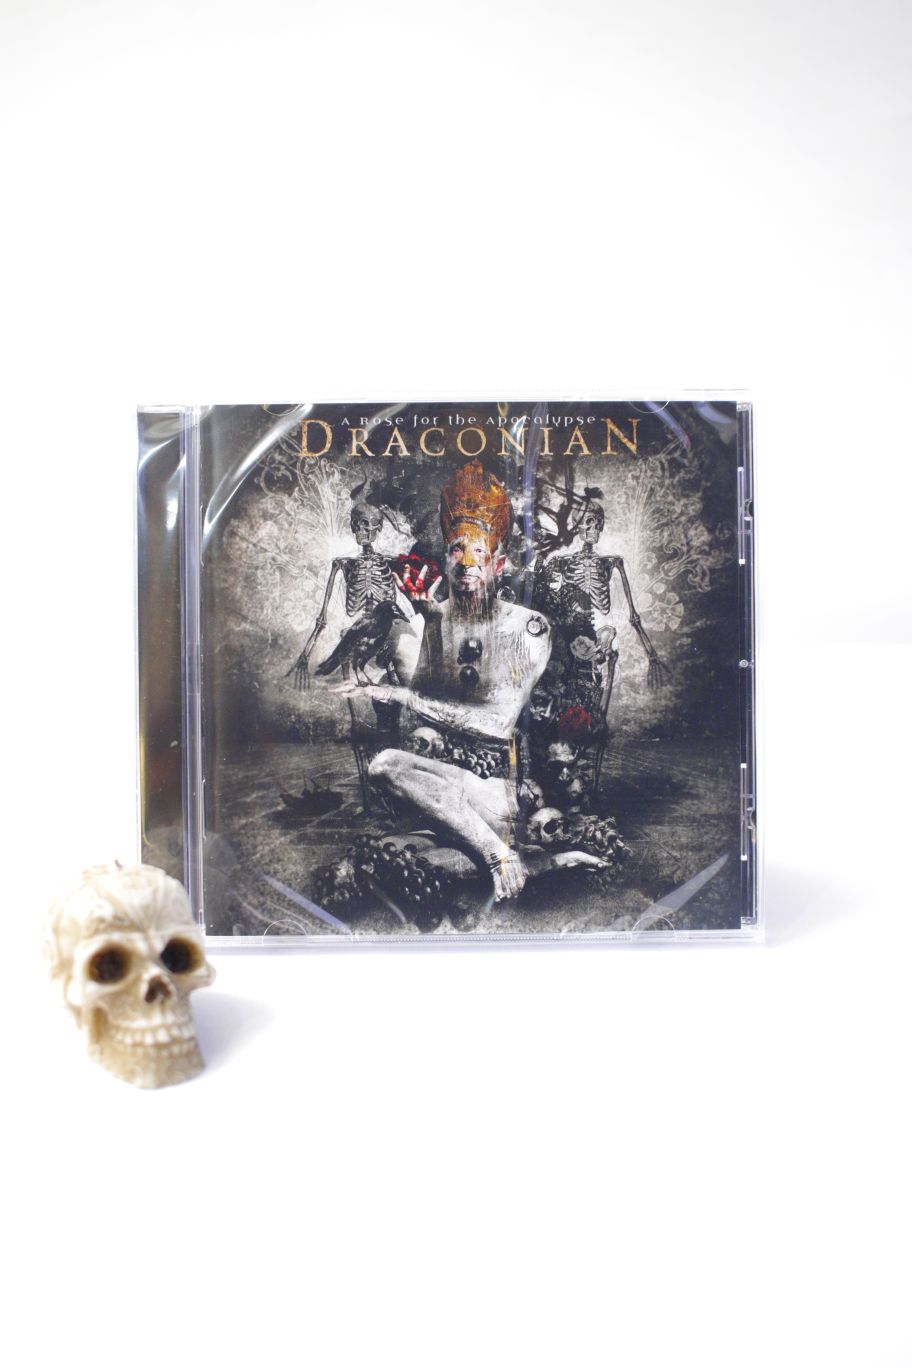 CD DRACONIAN A ROSE FOR THE APOCALYPSE 